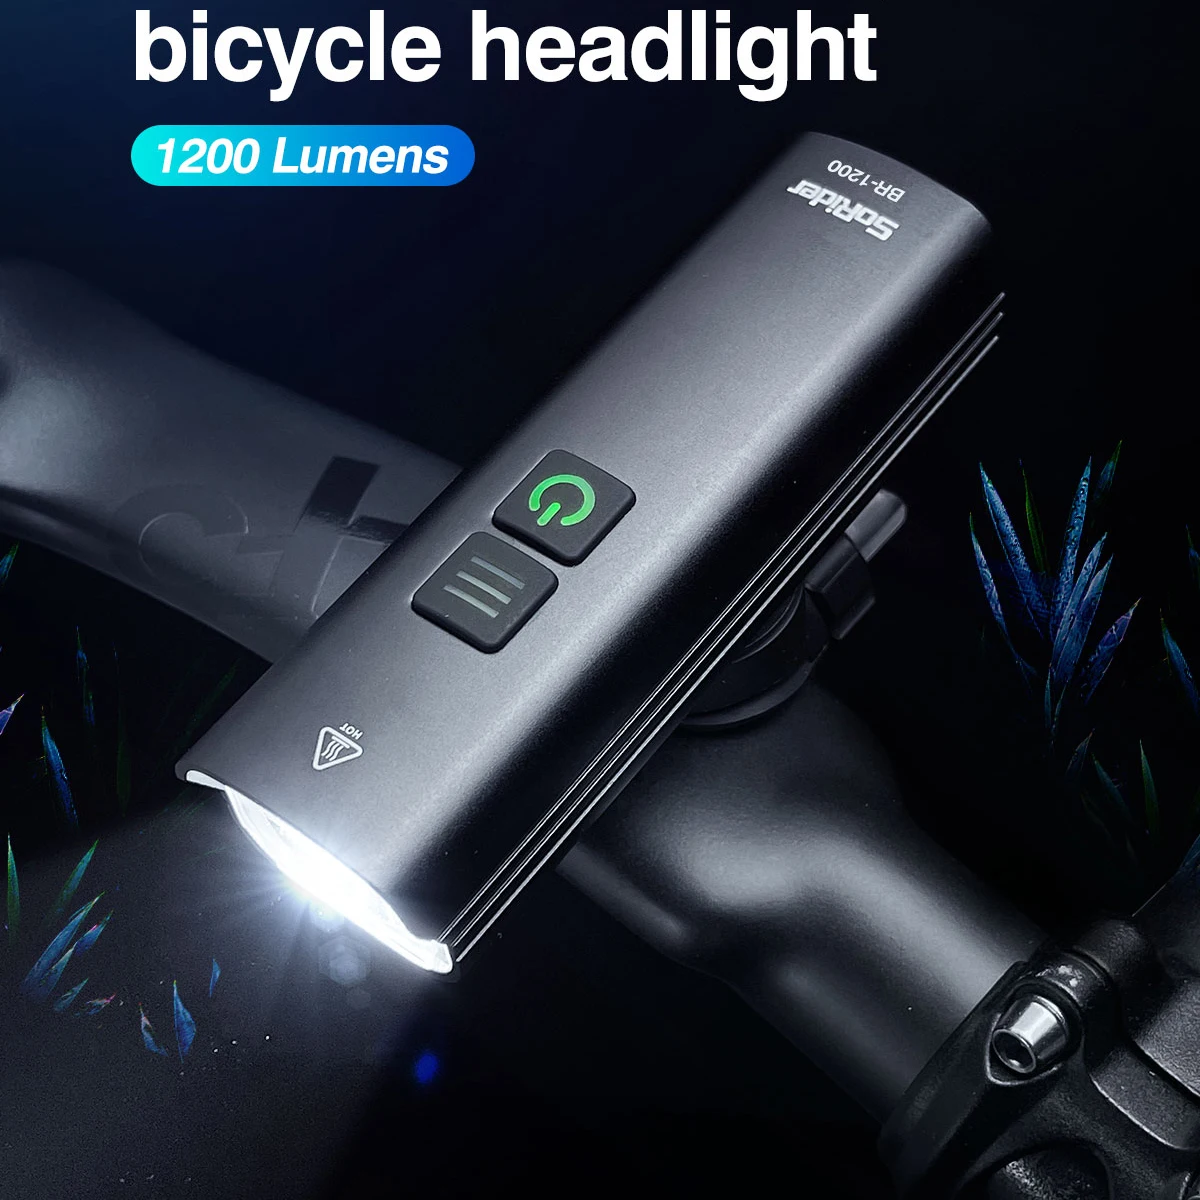 SoRider Waterproof Bicycle Light Headlight Bike Front Lamp USB Rechargeable LED 1200LM 4800mAH AI 1200 Cycling Lamp